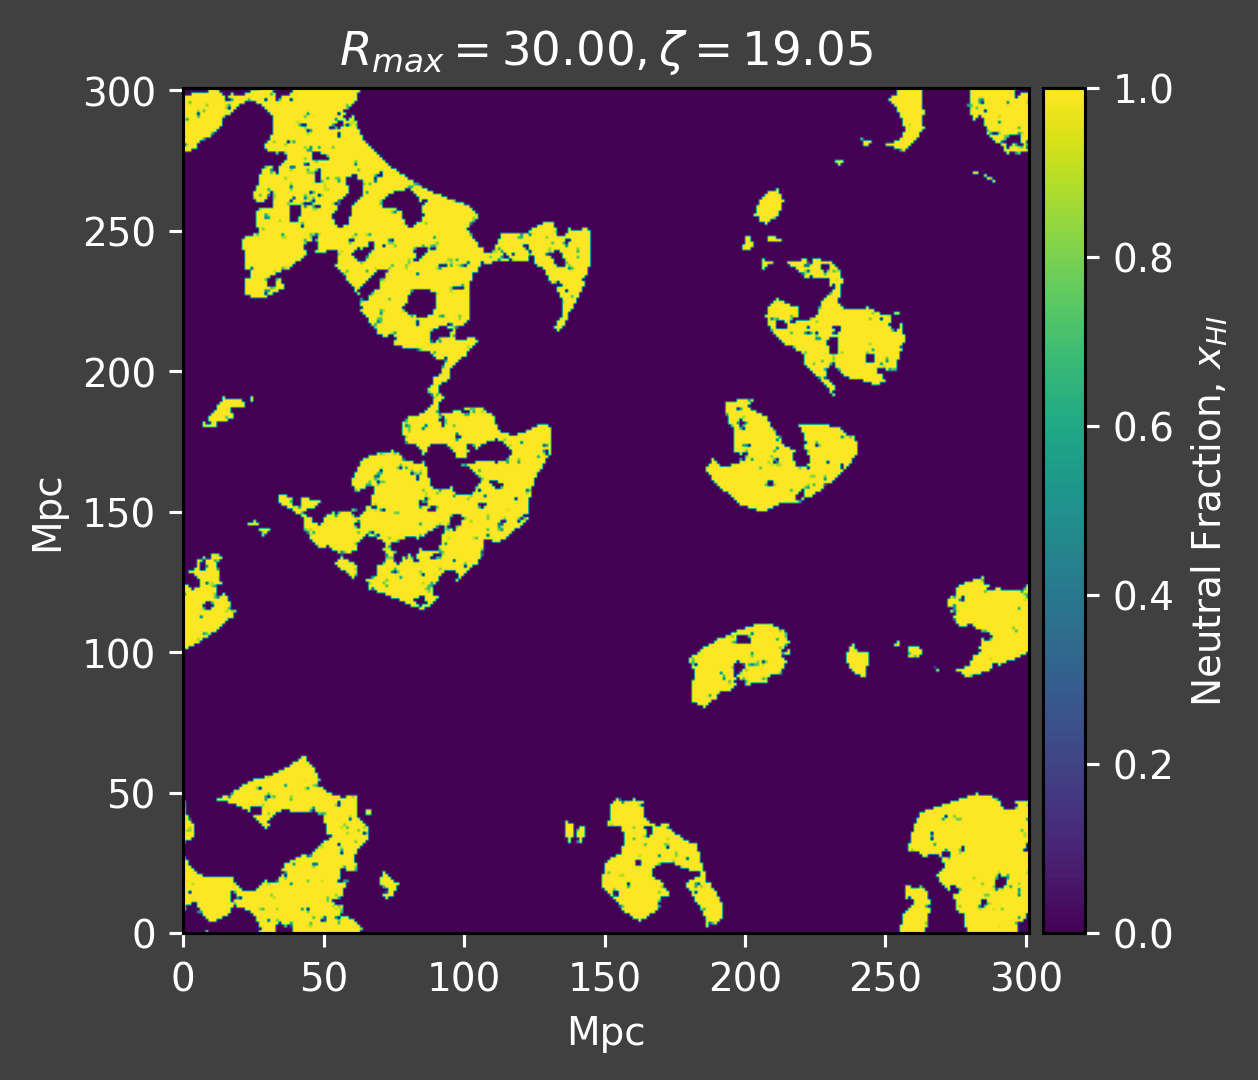 GIF alternating between four images from the author's simulations at Rmax values of 30, 11.39, 7.67 and 3.95. These show that as the value of Rmax is decreased, the size of the neutral regions decreases significantly.